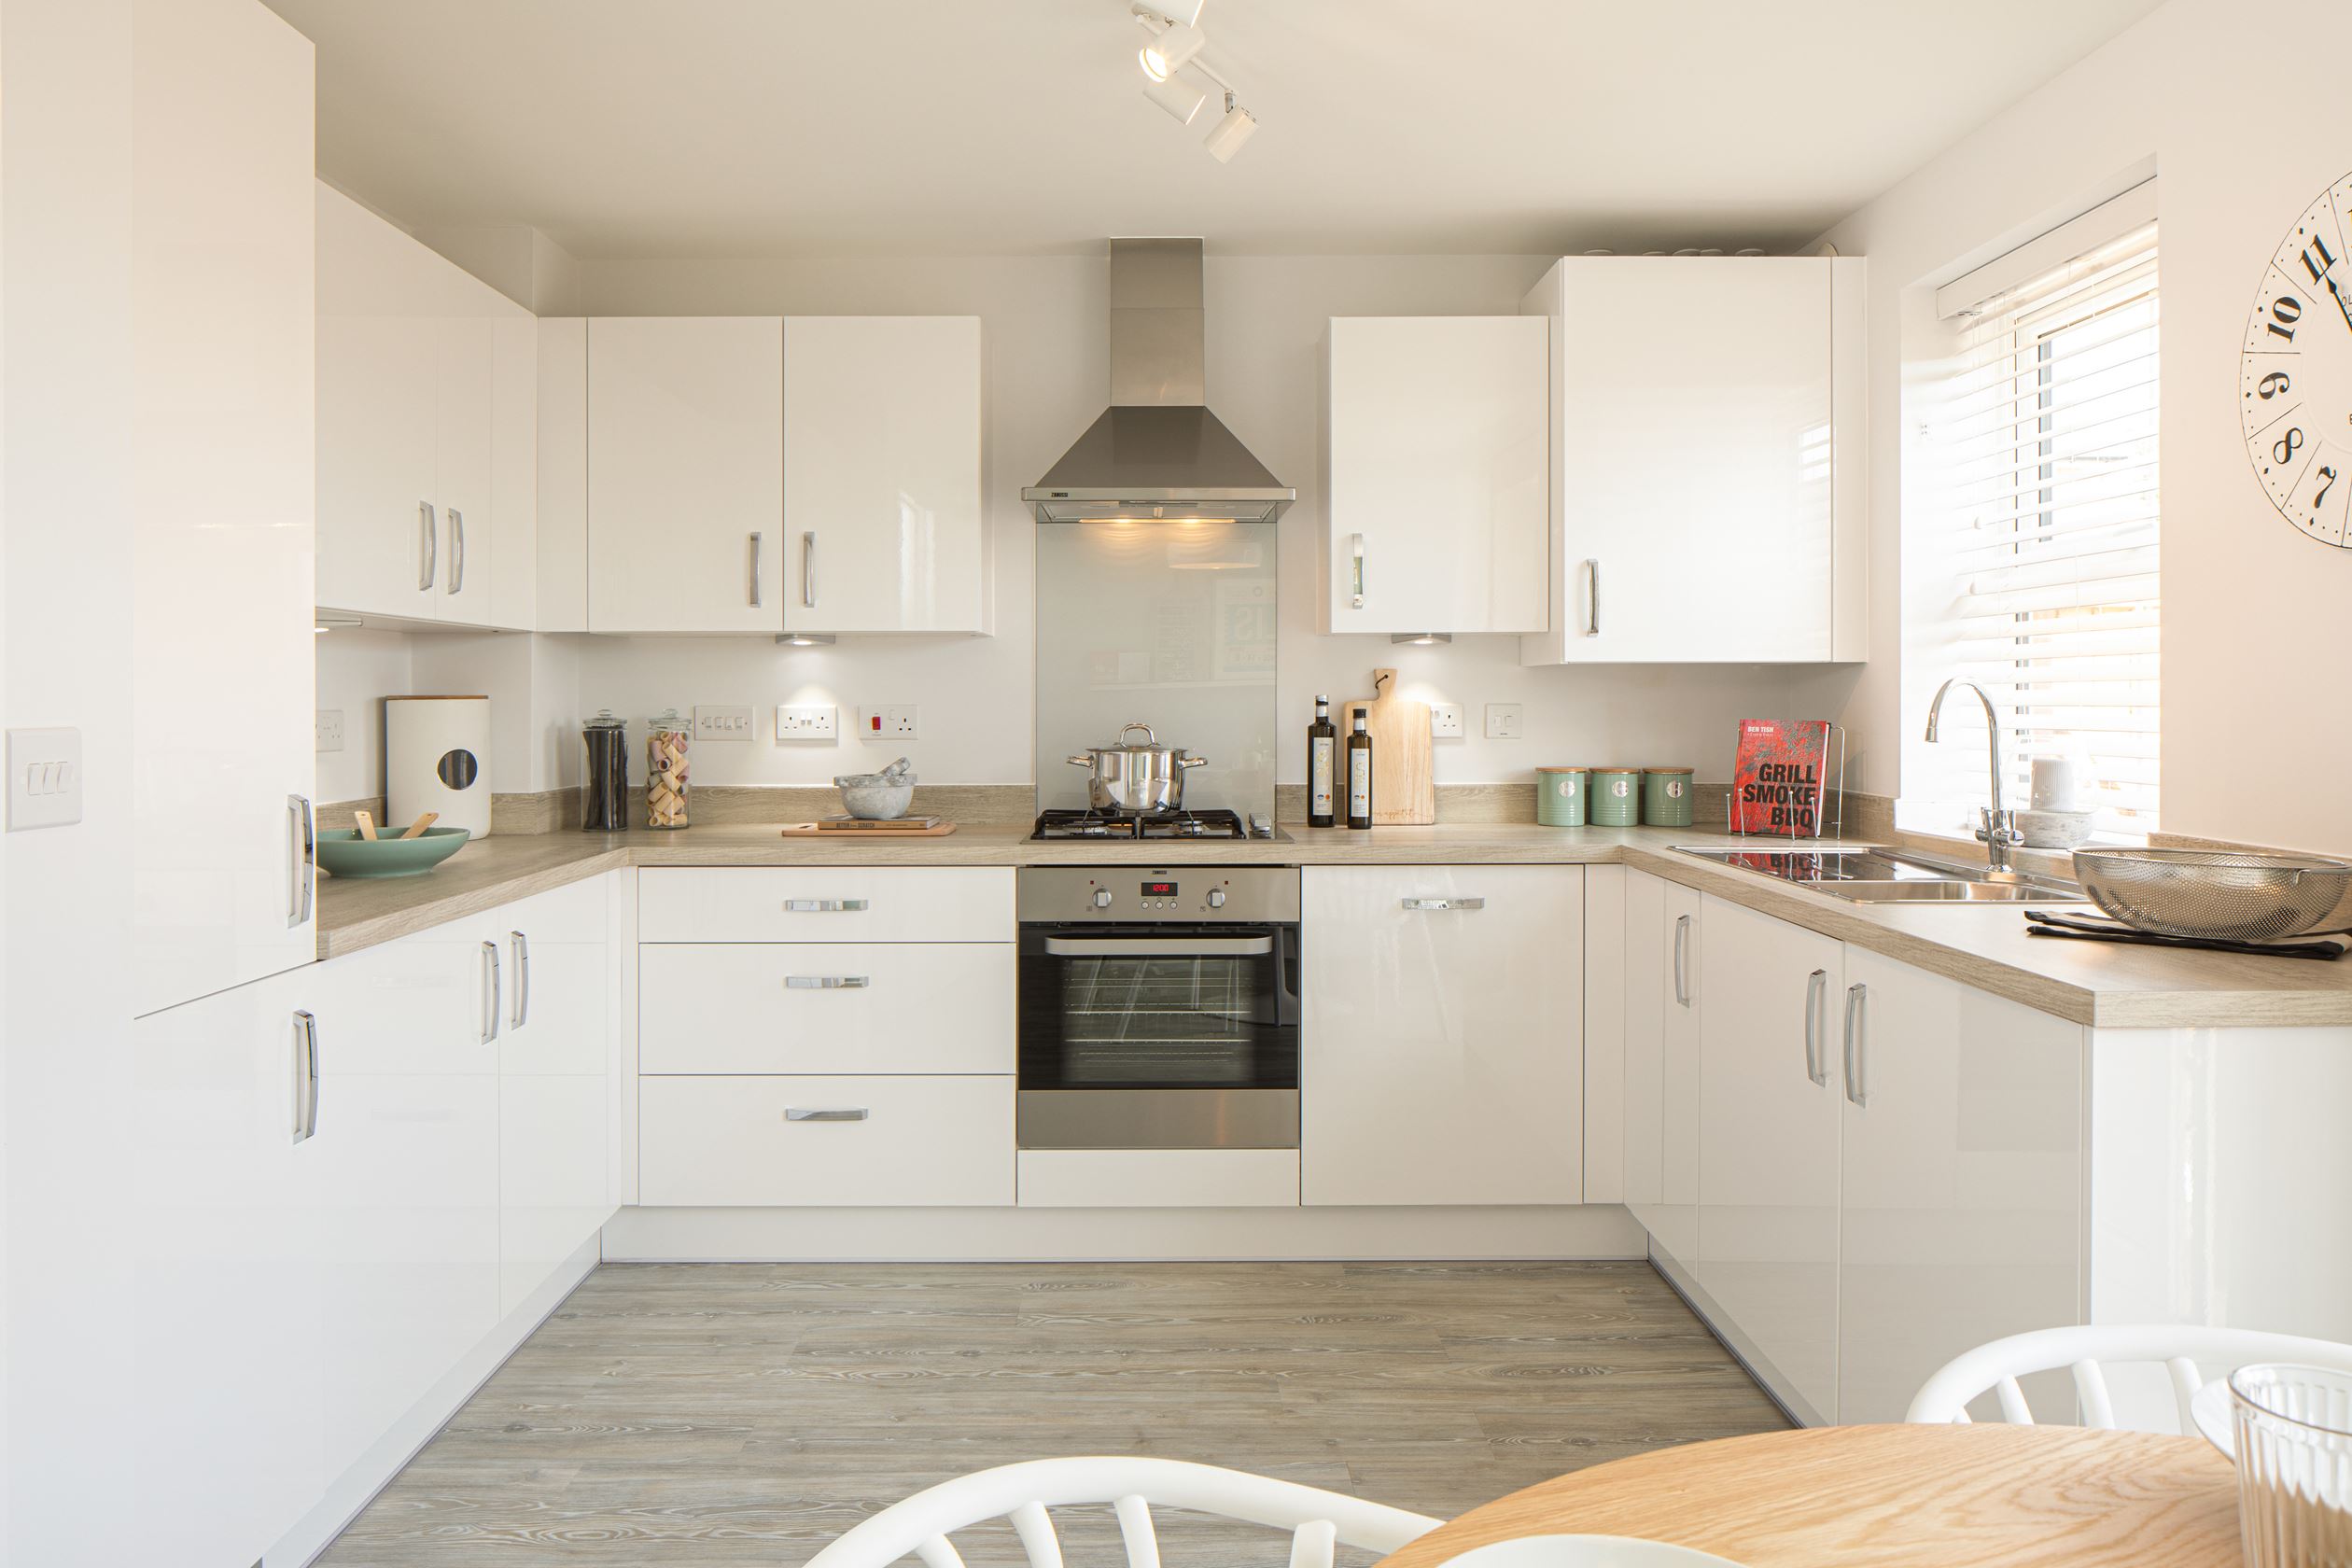 Property 3 of 8. The Archford Plot 2 - Open-Plan Kitchen